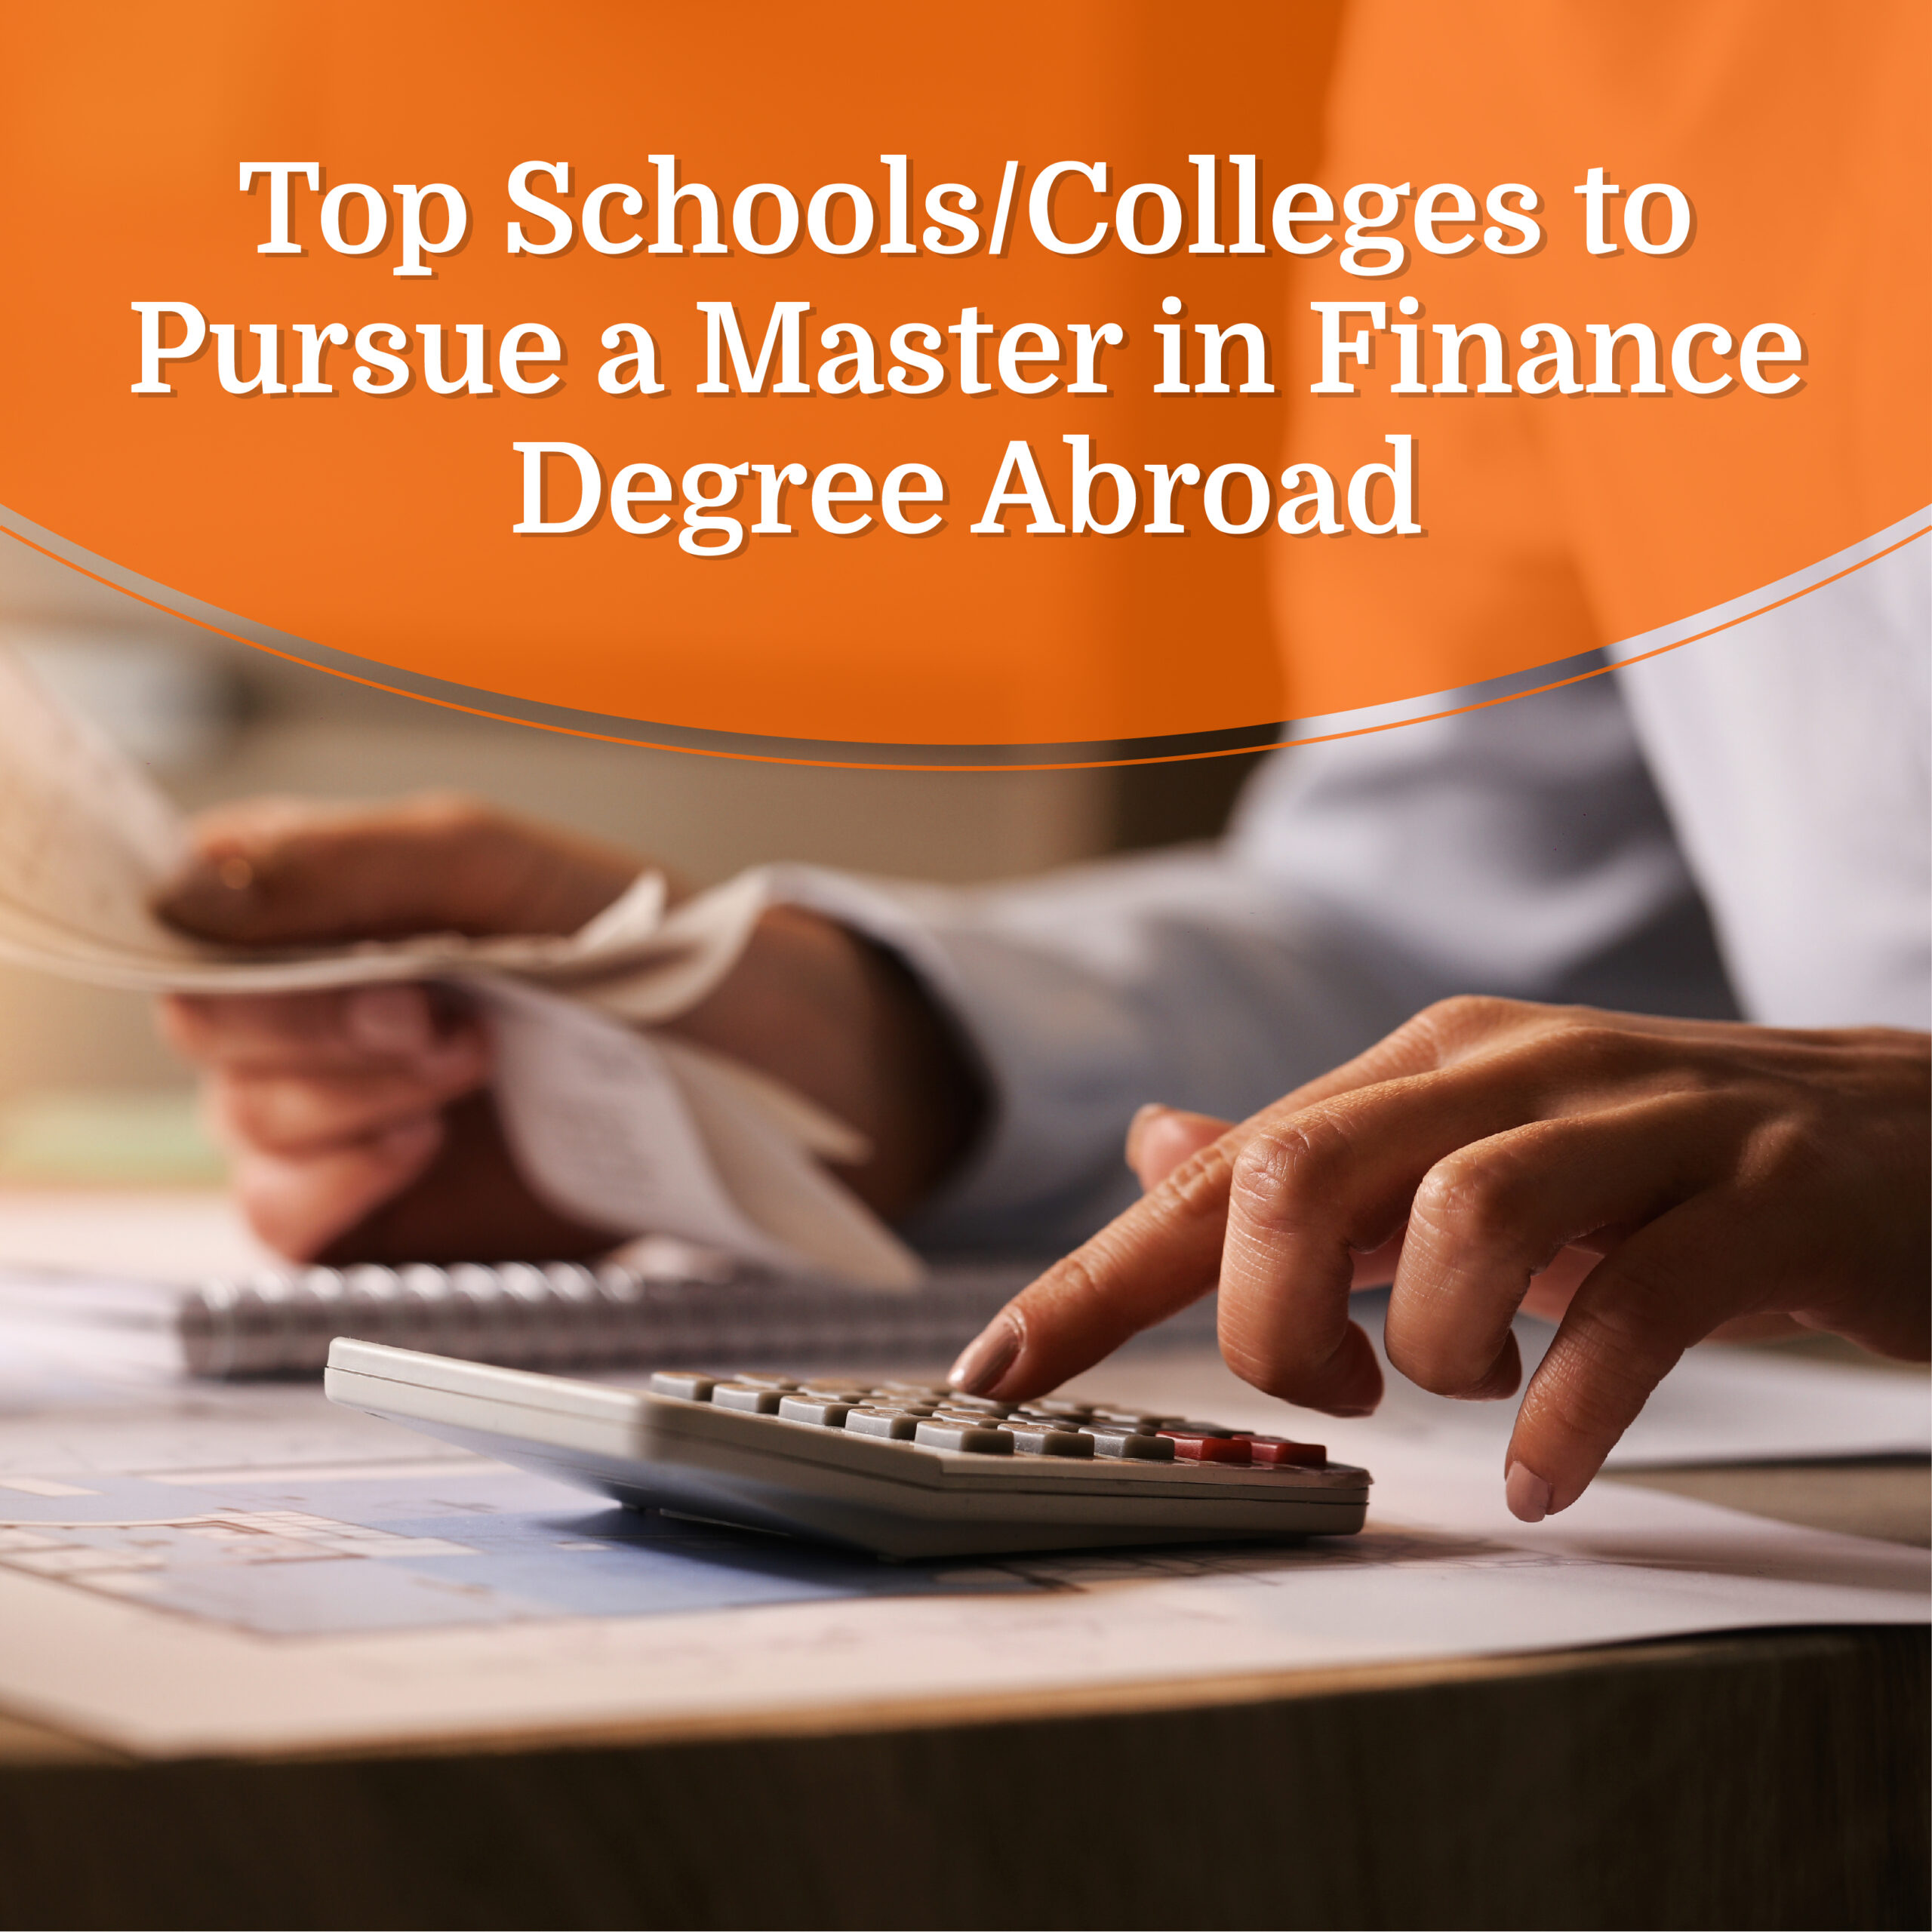 Top Schools/Colleges to Pursue a Master’s in Finance Degree Abroad